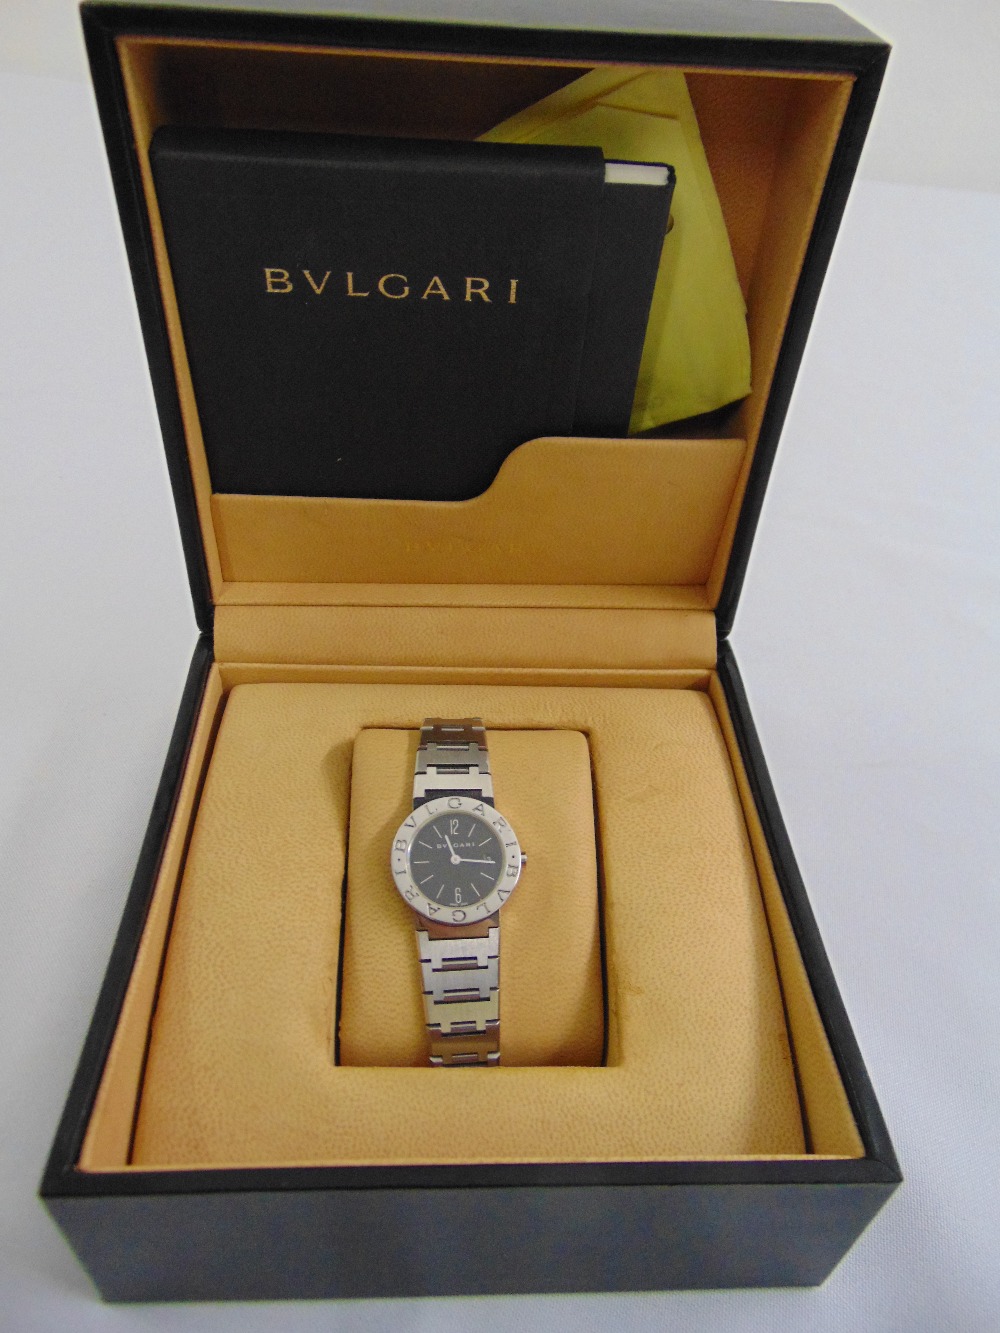 A Bulgari ladies watch with articulated strap in original fitted case and documents